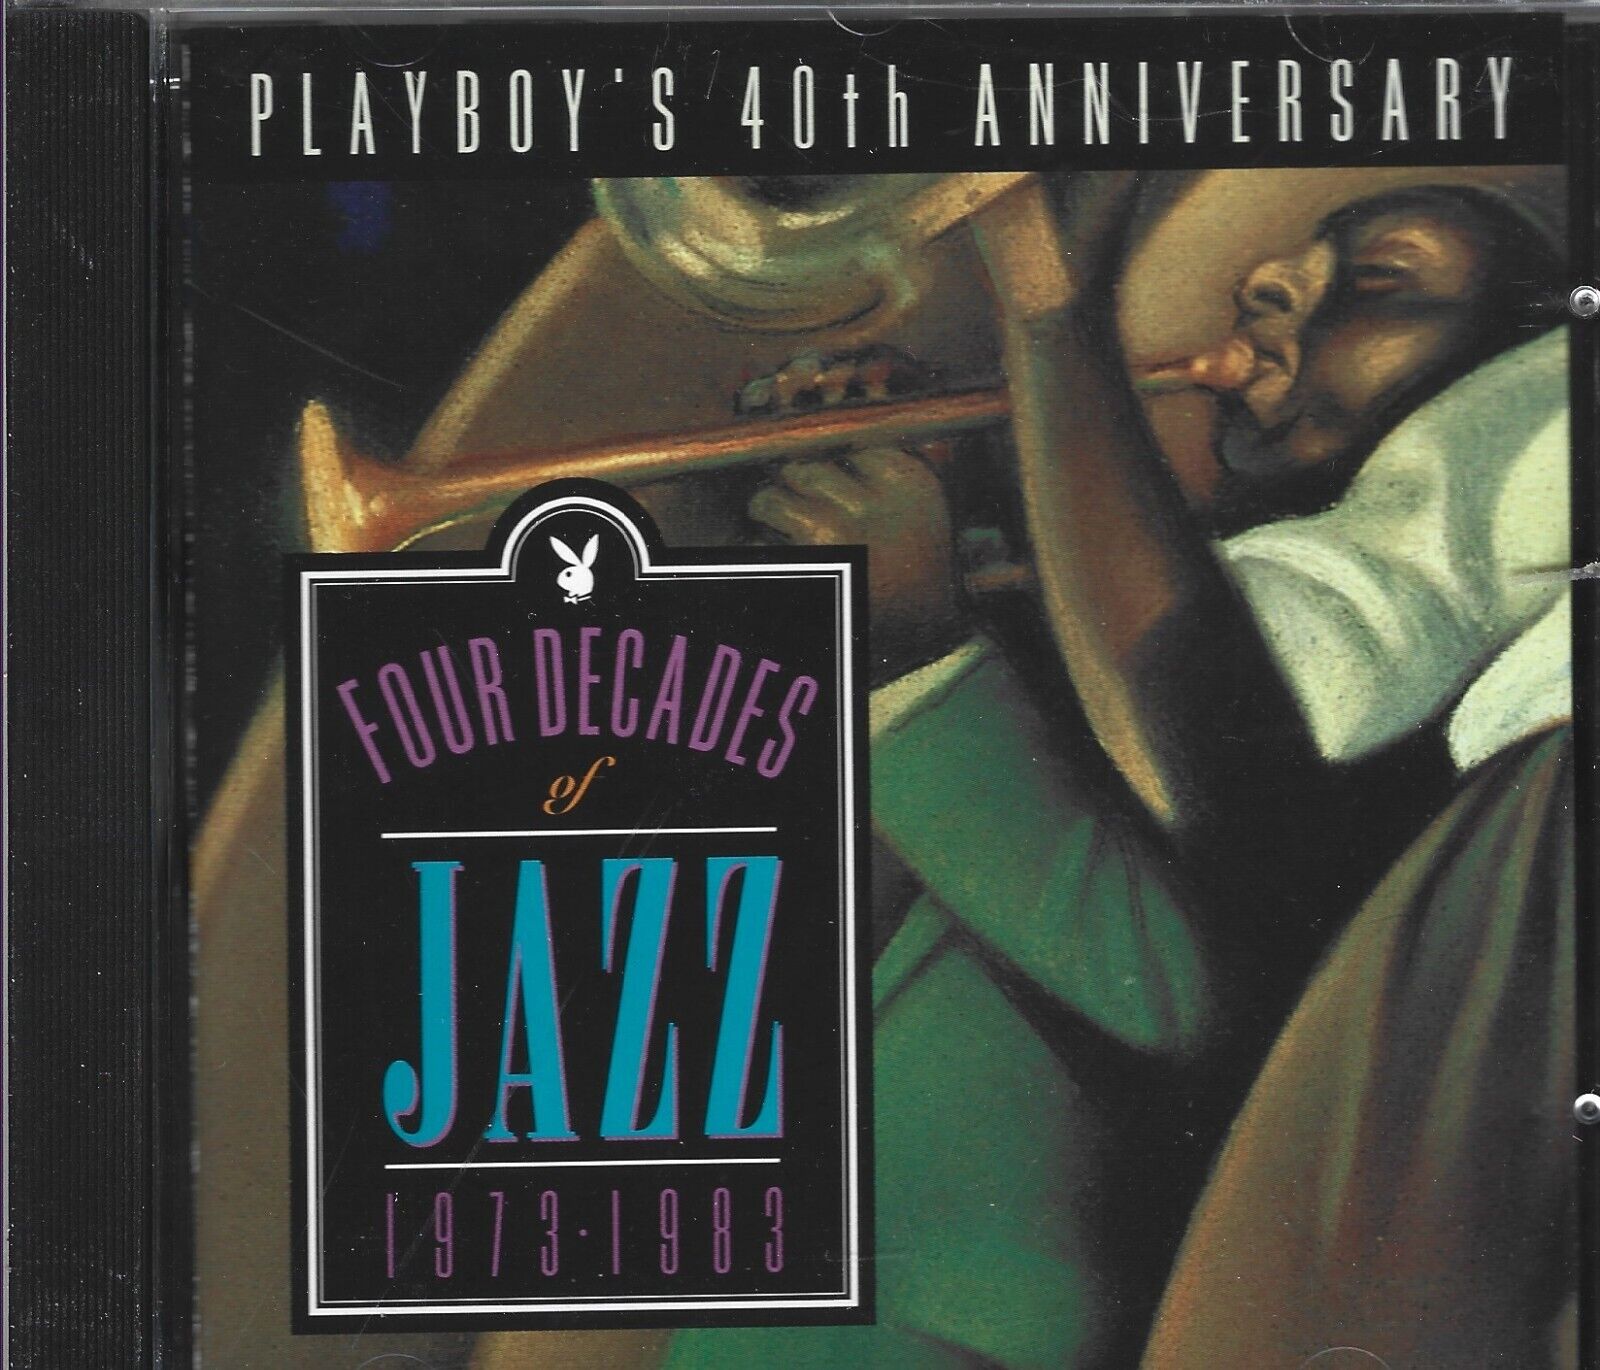 PLAYBOY\'S 40th ANNIVERSARY- FOUR DECADES of JAZZ 1983-1993 - CD